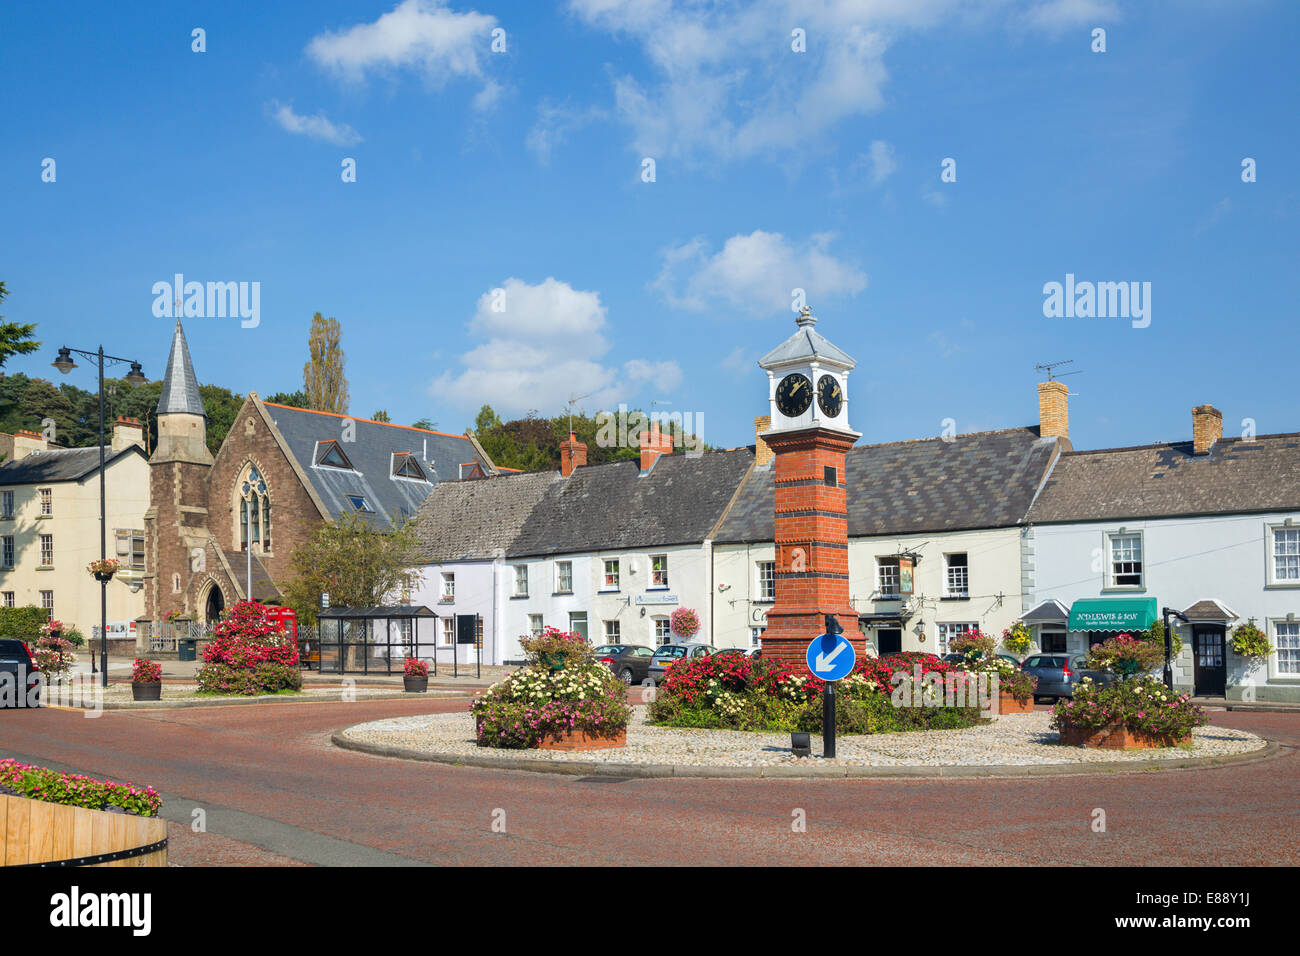 Twyn square, l'Usk, Monmouthshire. Banque D'Images